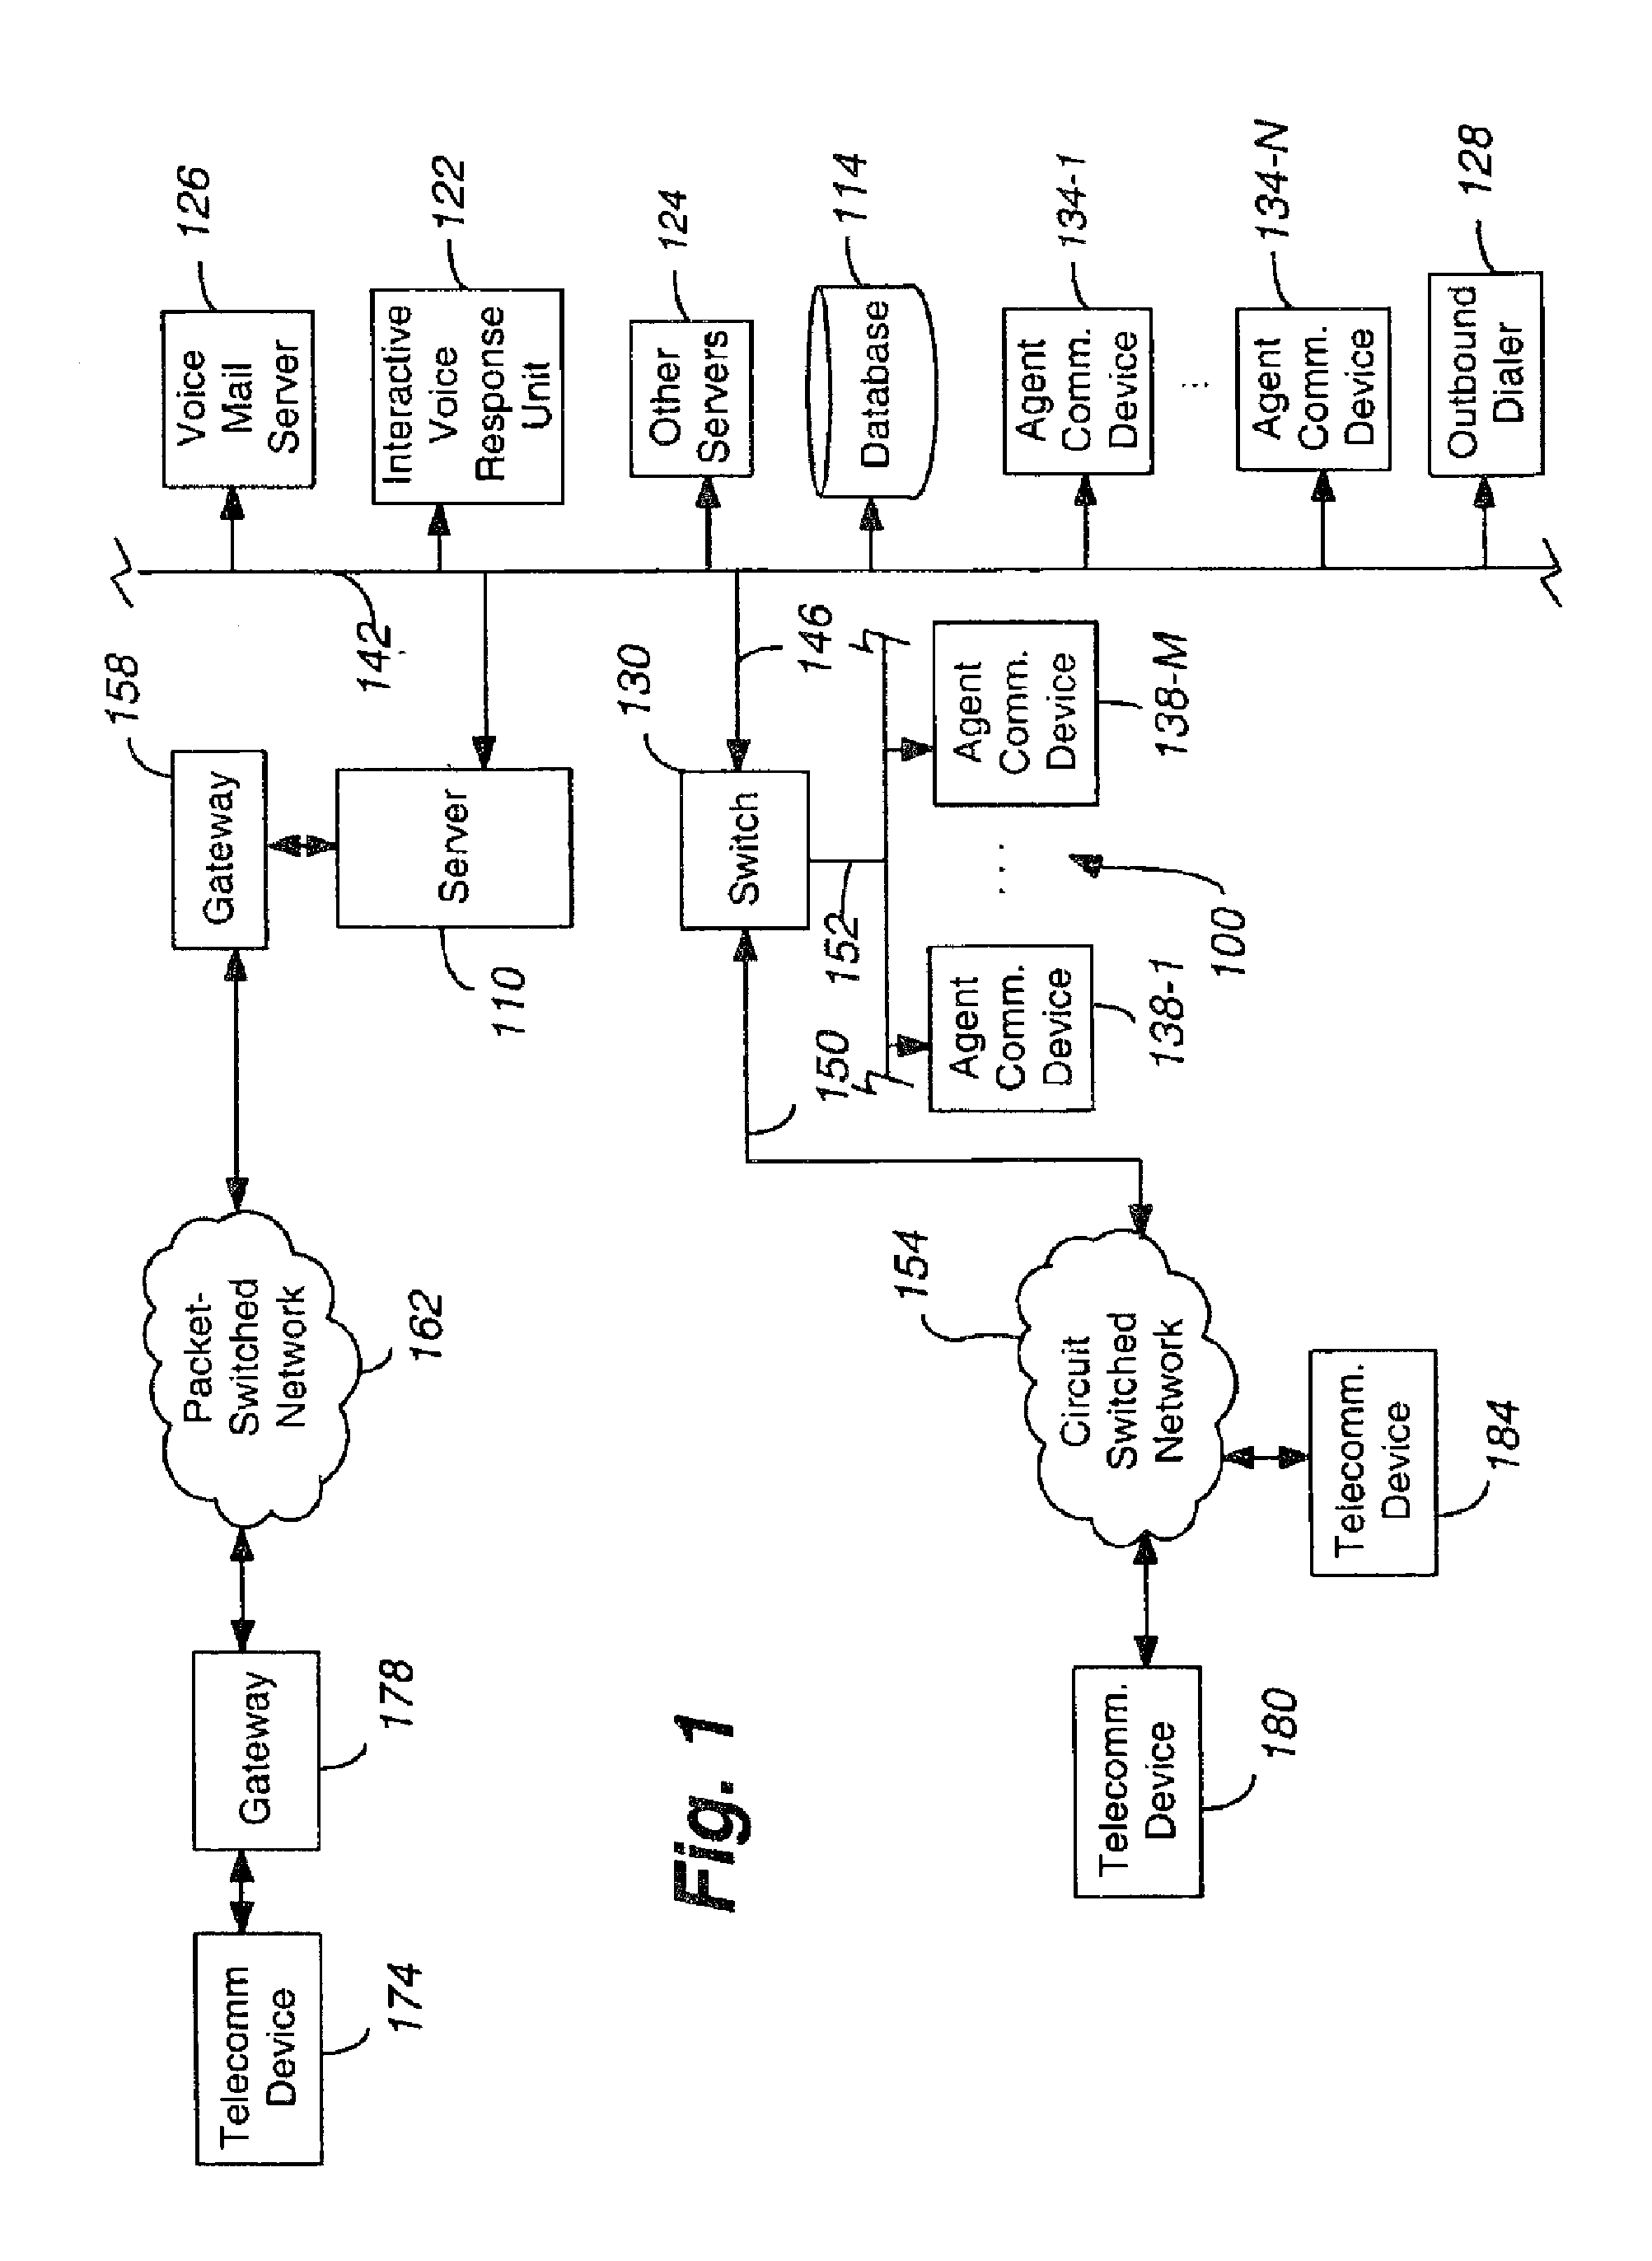 System and method for delivering a contact to a preferred agent after a set wait period